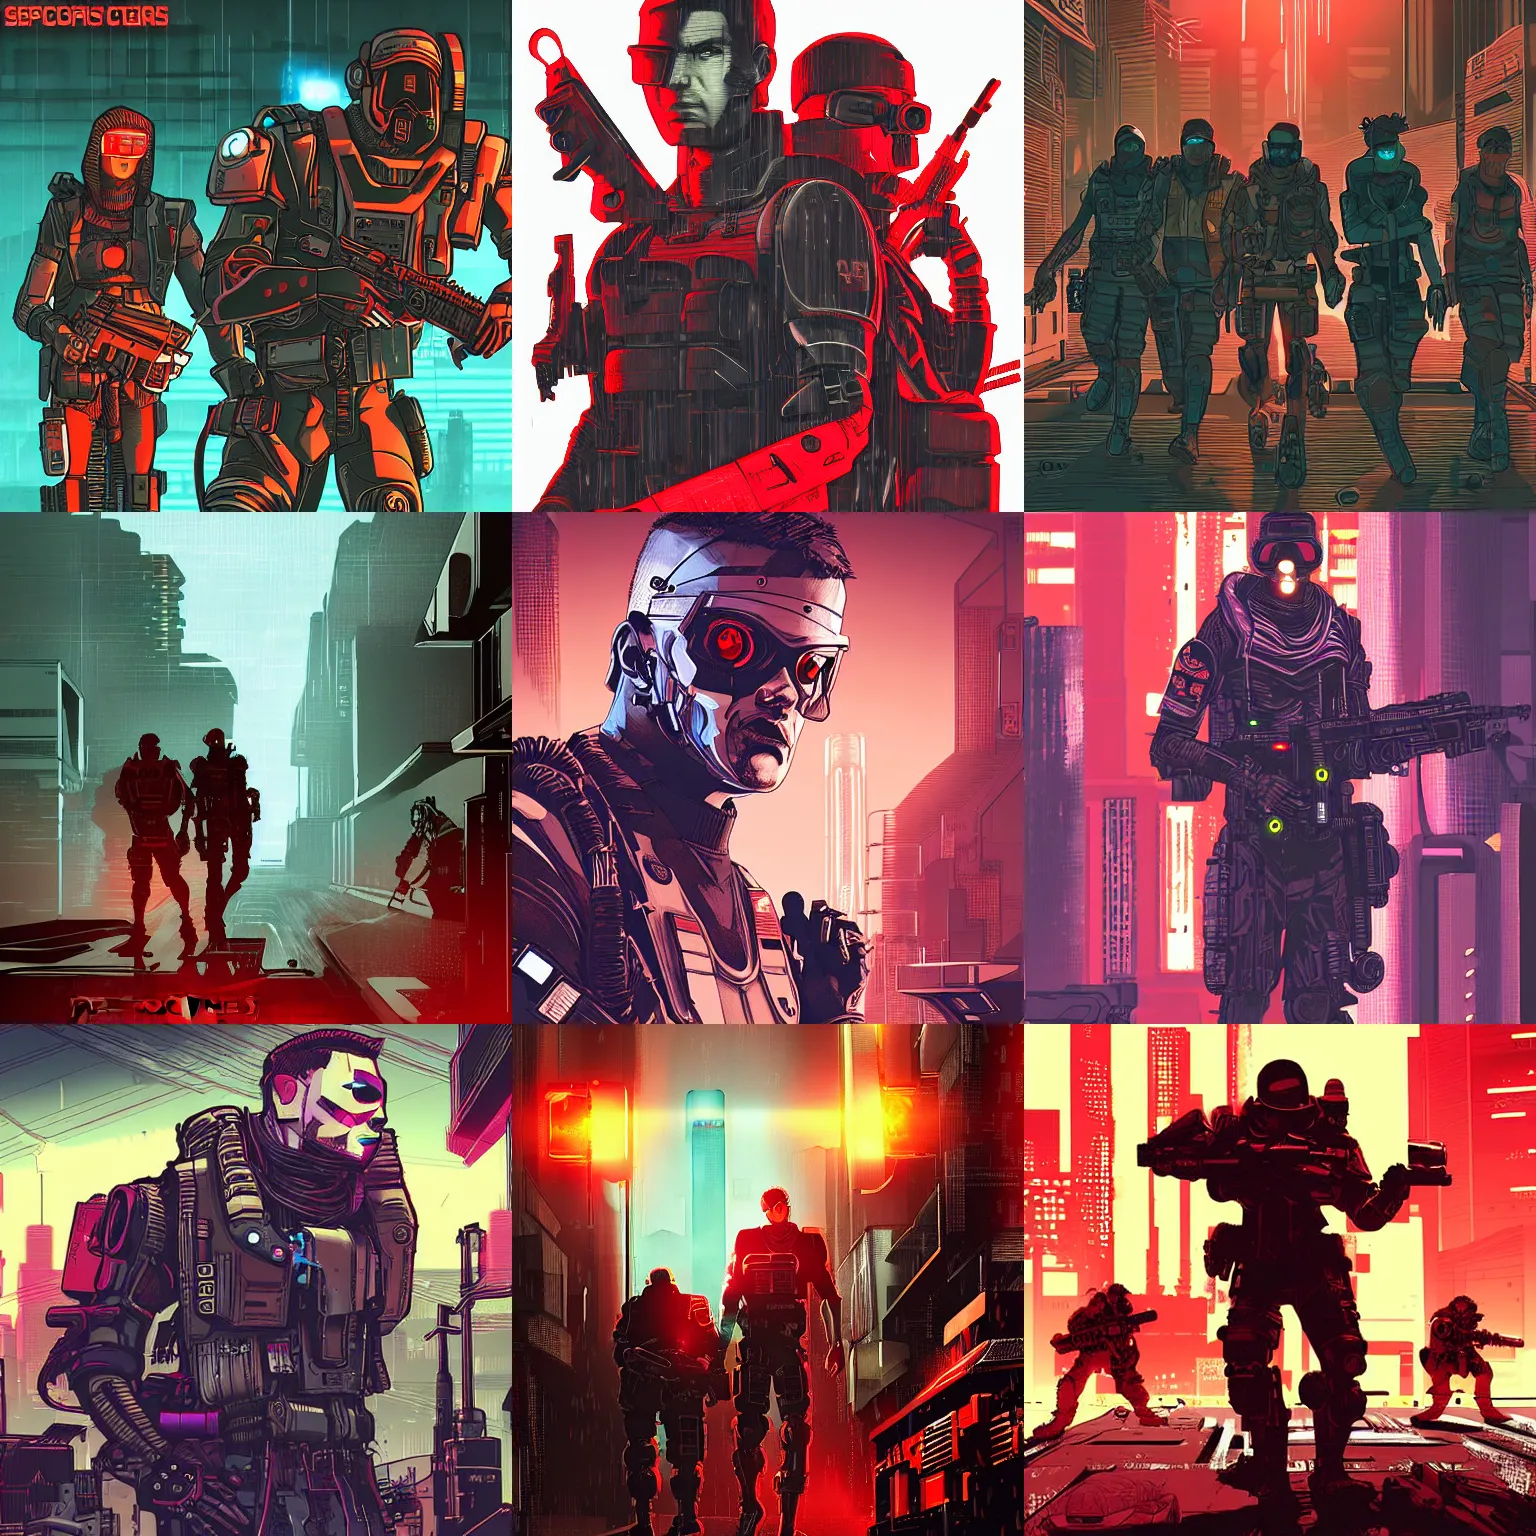 Prompt: forces spec ops elite cyberpunk Sci fi in the style of Richard Bagnall Richard Bagnall Cyberpunk RED Illustration